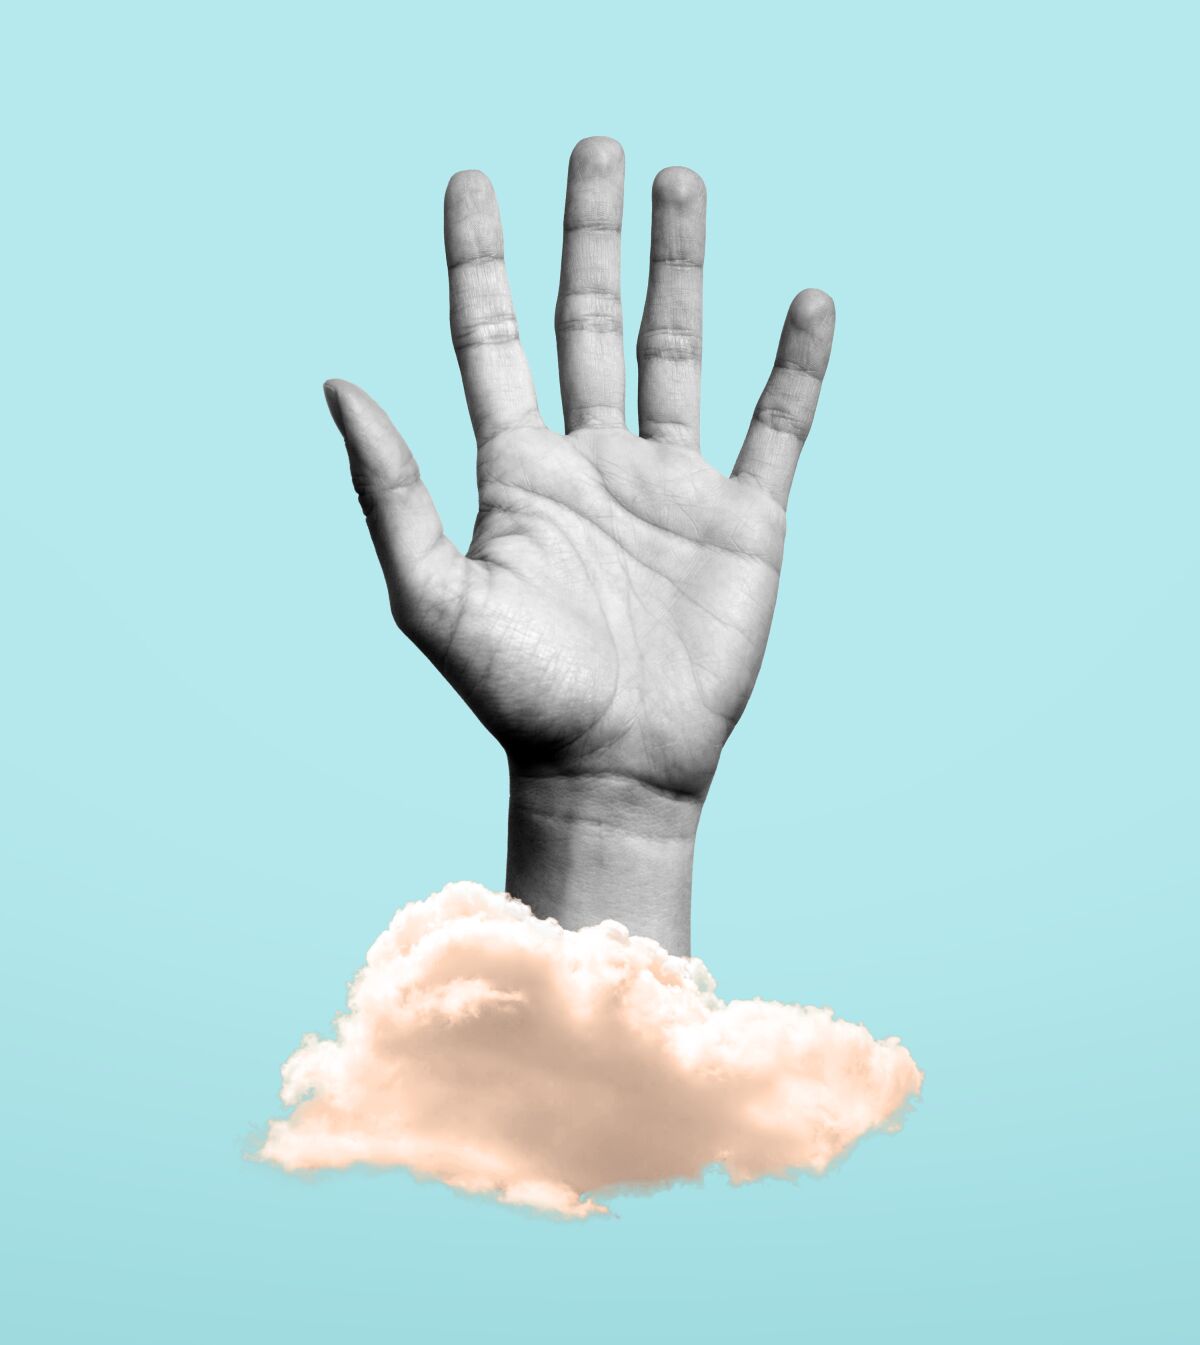 Photo illustration of a left hand rising from a sepia toned cloud on a pale blue background.